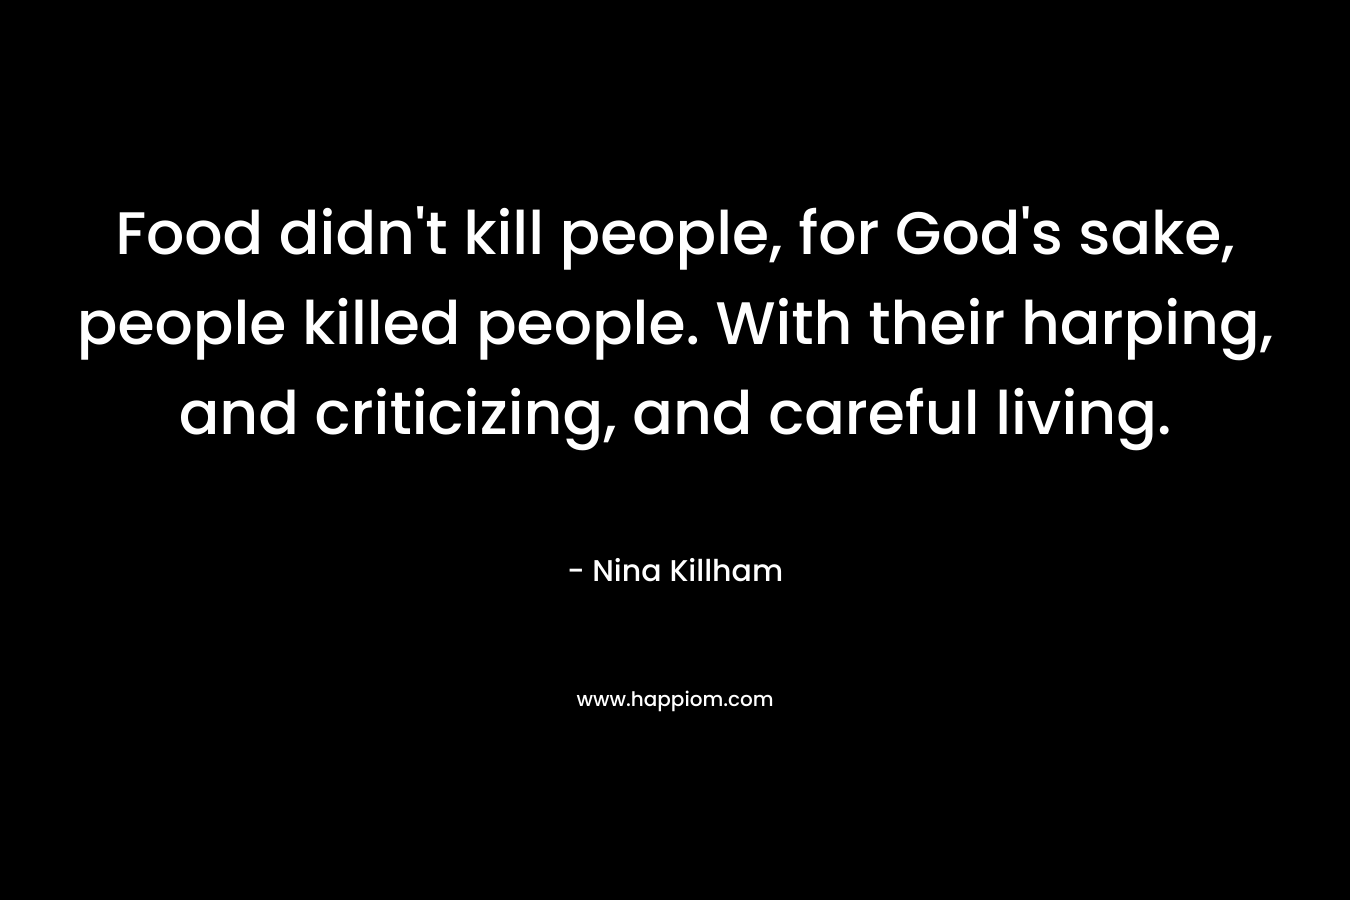 Food didn't kill people, for God's sake, people killed people. With their harping, and criticizing, and careful living.